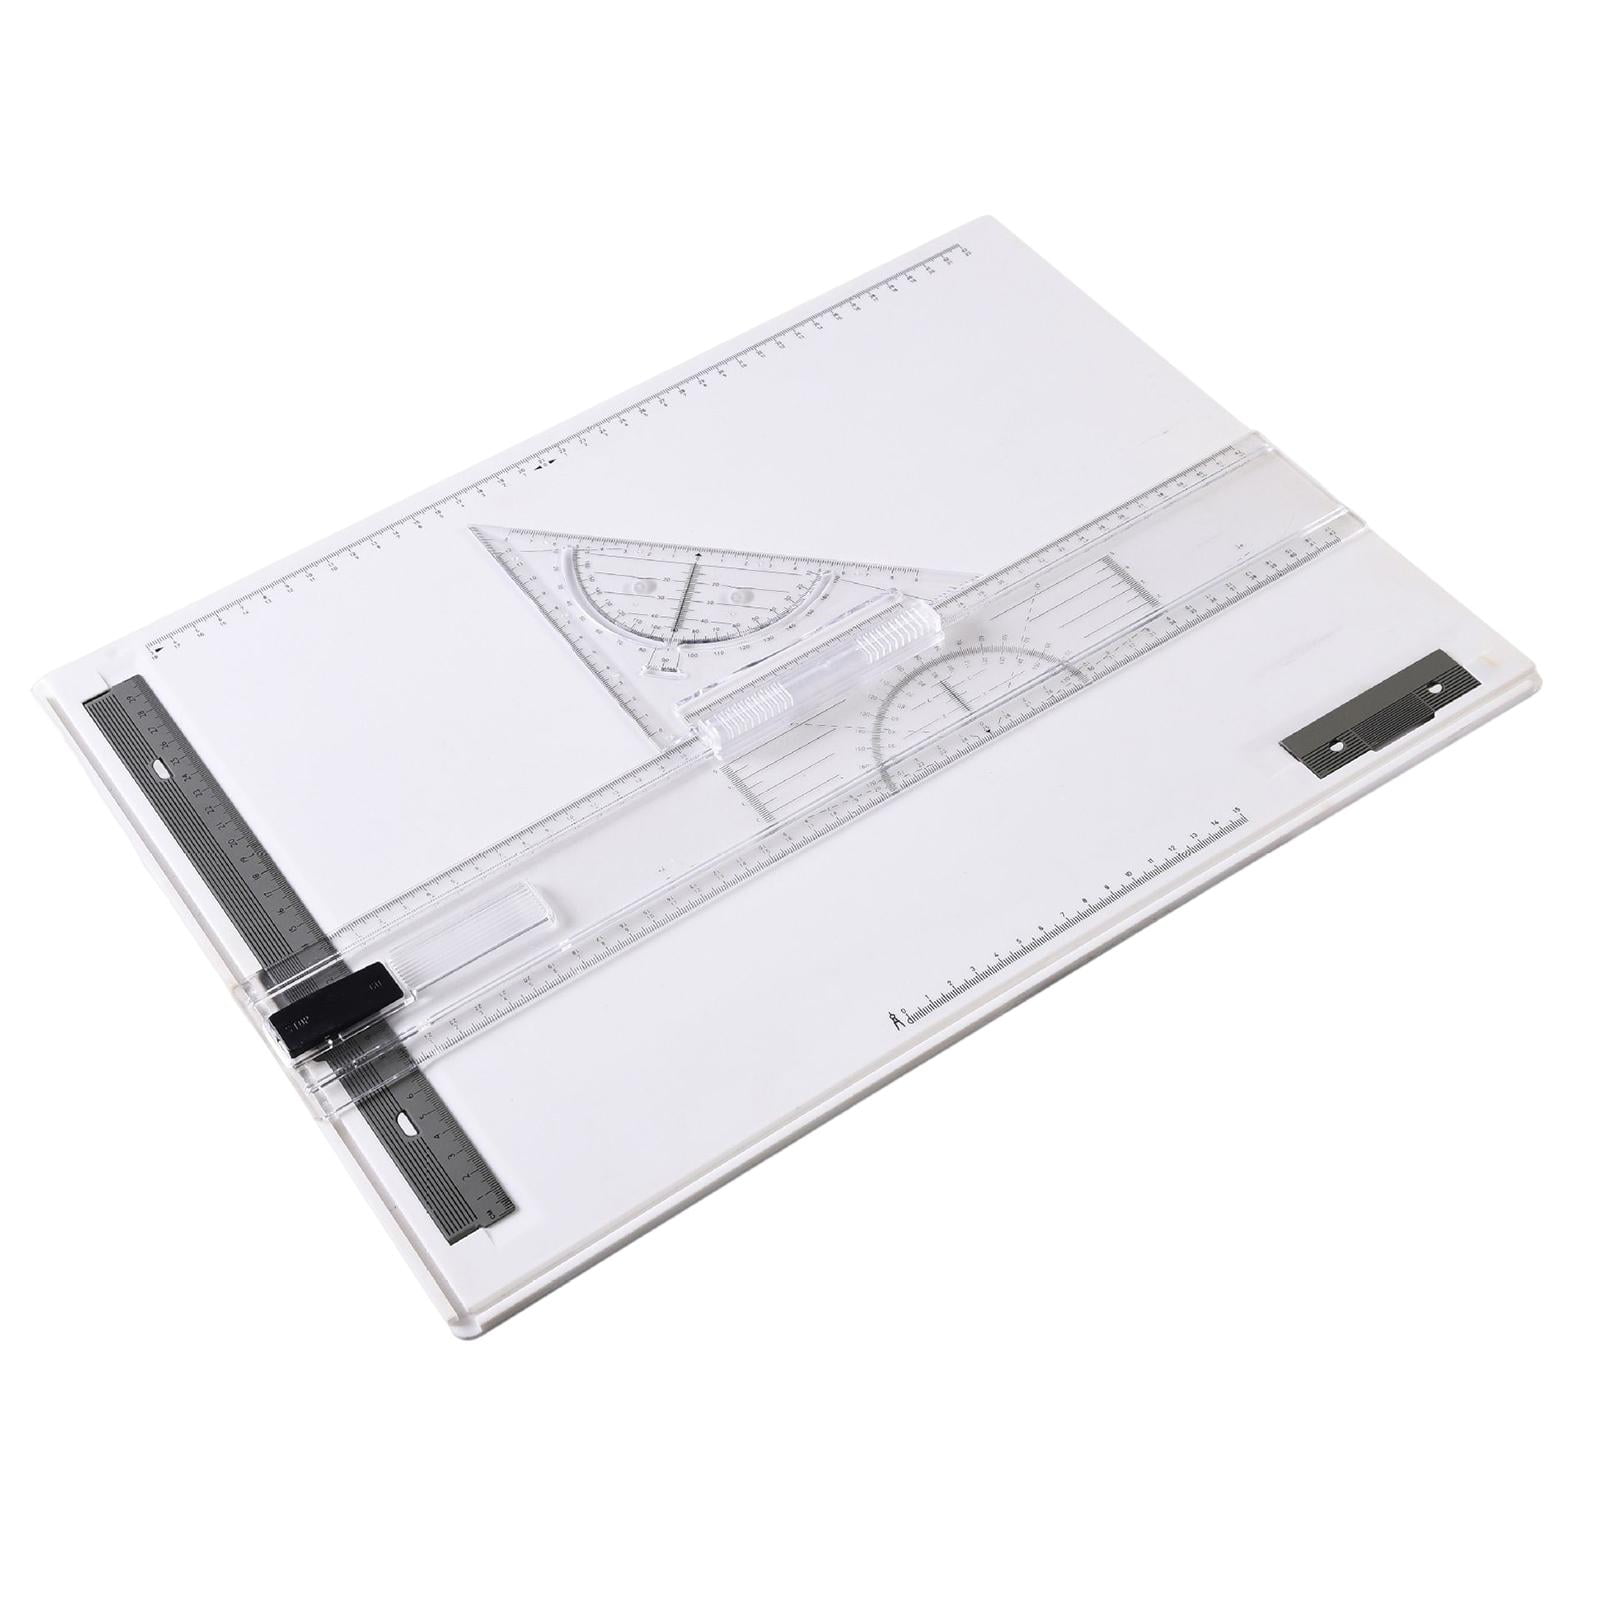 SALEMAR A3 Drafting Table Drawing Board, Drawing Tool Set Graphic Architectural Sketch Board with Parallel Motion, Set Square, Clamps, Protractor, Ant